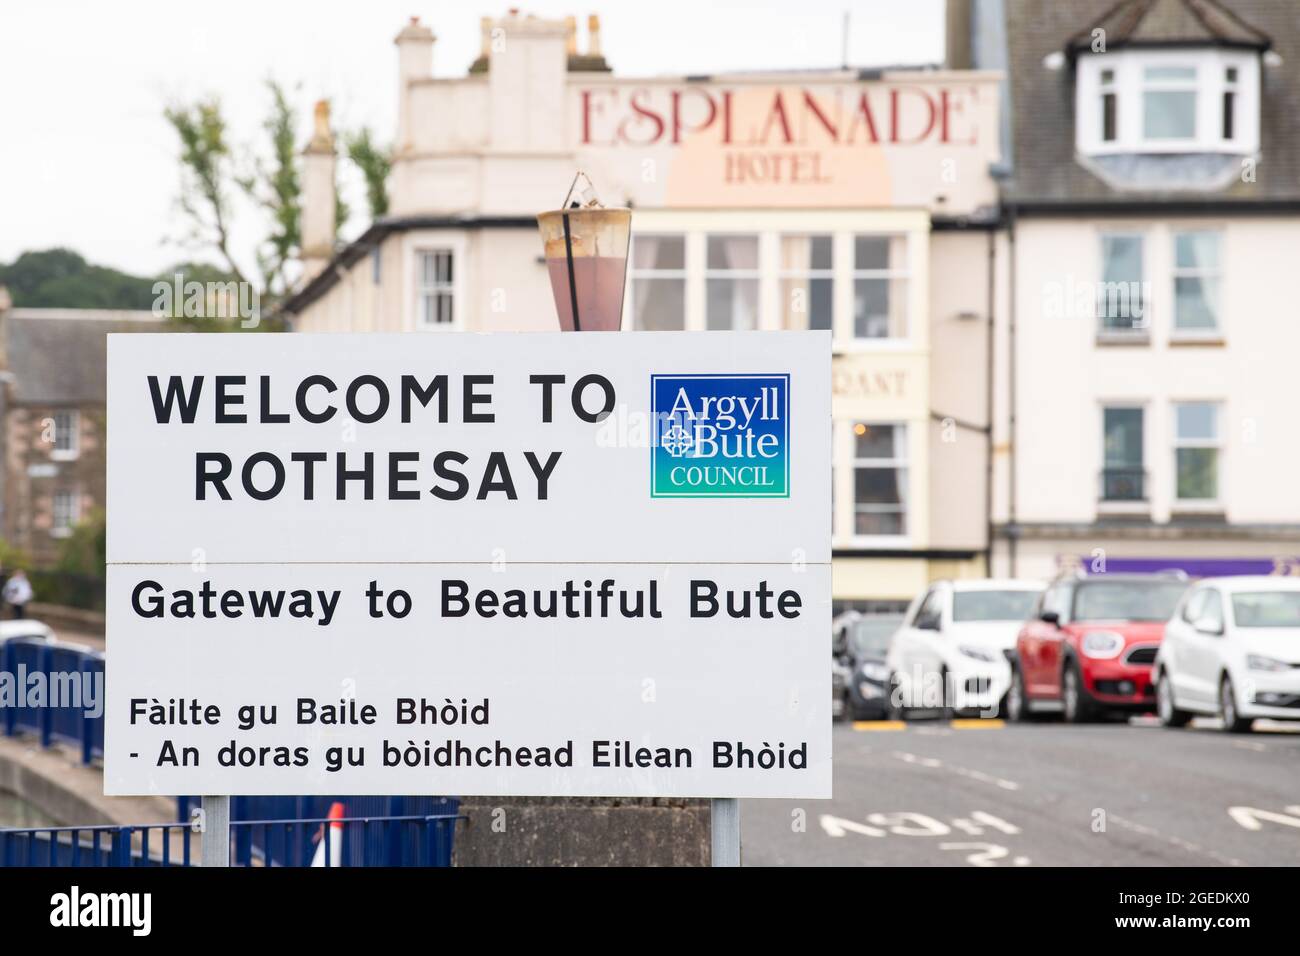 Welcome to Rothesay Gateway to Beautiful Bute sign at Rothesay Ferry Terminal, Isle of Bute, Argyll and Bute, Scotland, UK Stock Photo